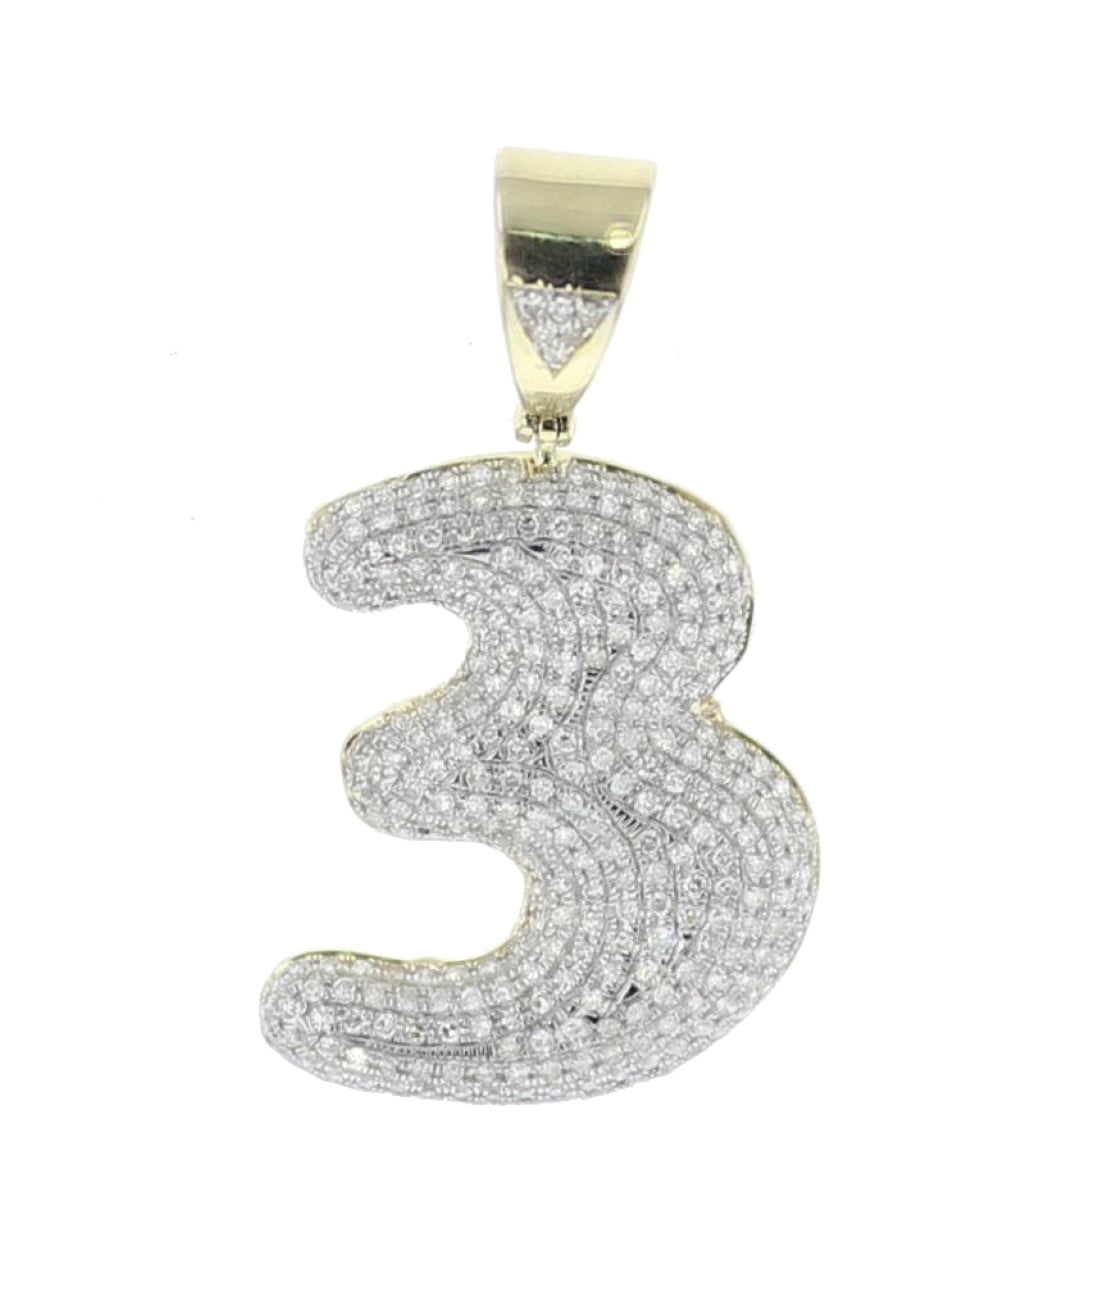 Silver Number 3 Pendant Necklace | Hersey & Son Silversmiths